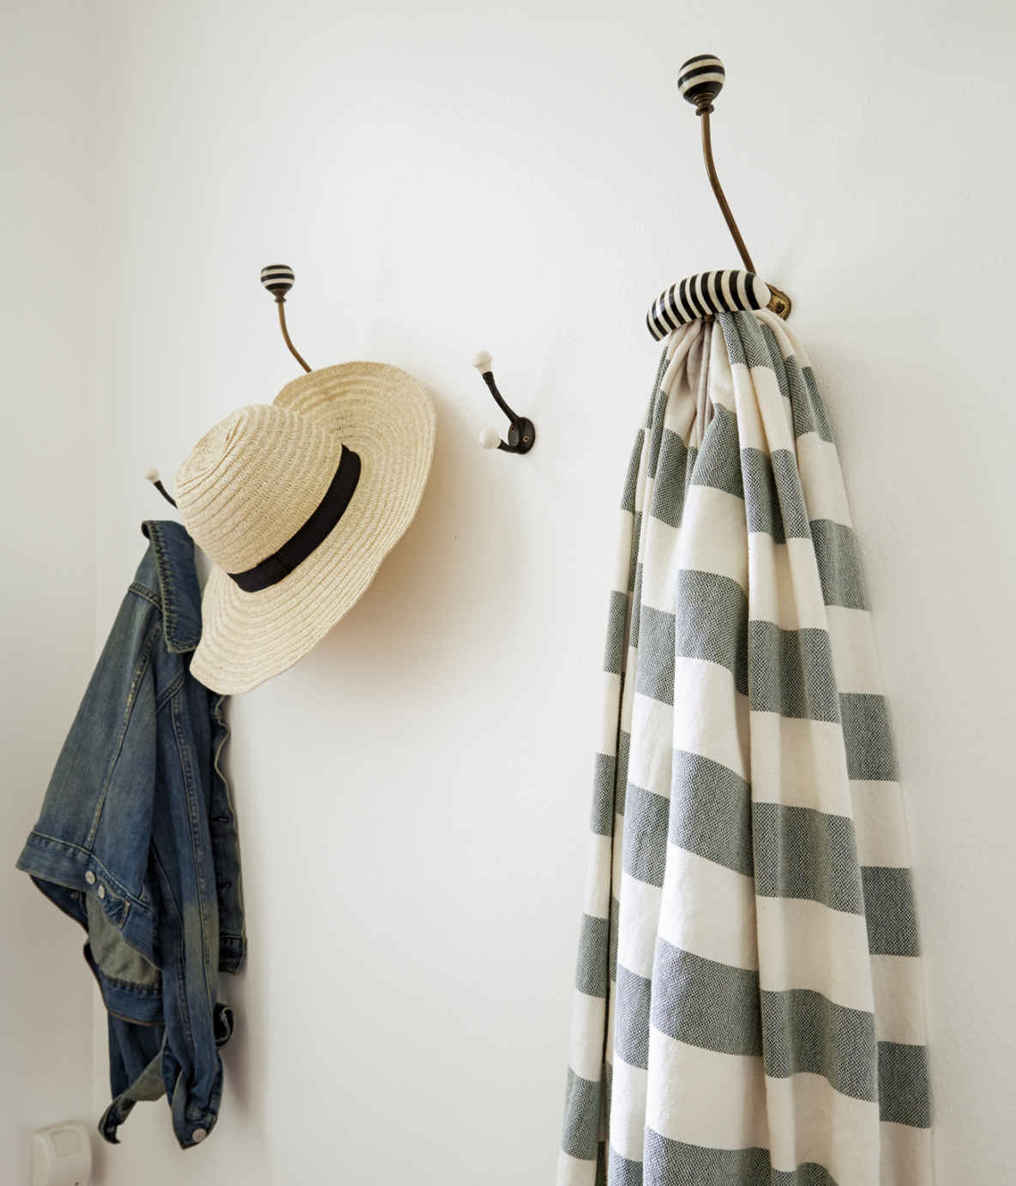 HOOK. LINE. SINKER. A series of wall-mounted hooks are a good-looking way to customize storage in an entry. Just obey the cardinal rule: one item per hook, or your wall could start to resemble a messy closet.